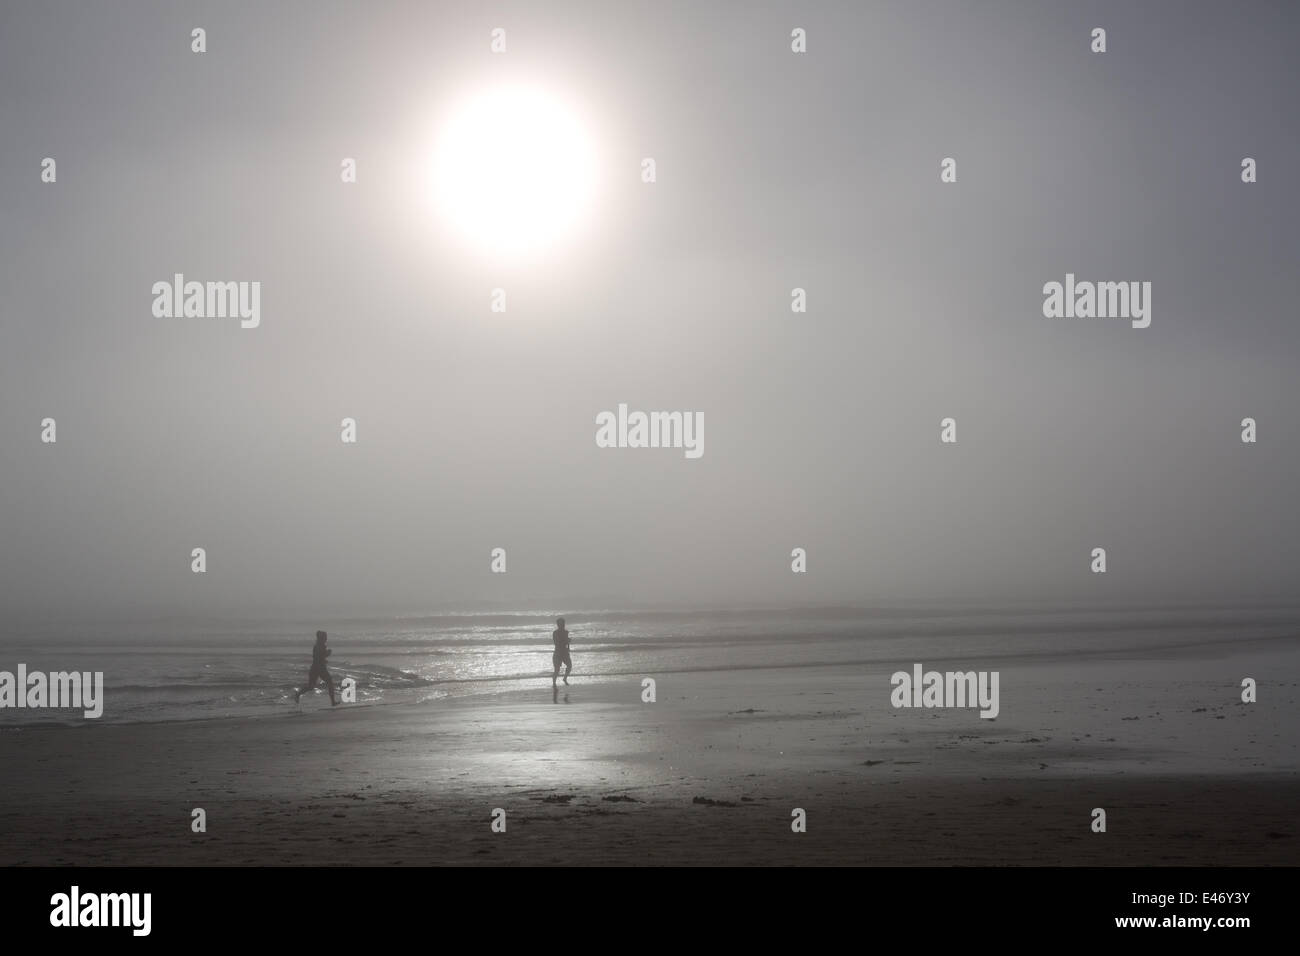 Silhouette of runners at the foggy Pacific shore, illuminated by the sun, in February 2014. Stock Photo